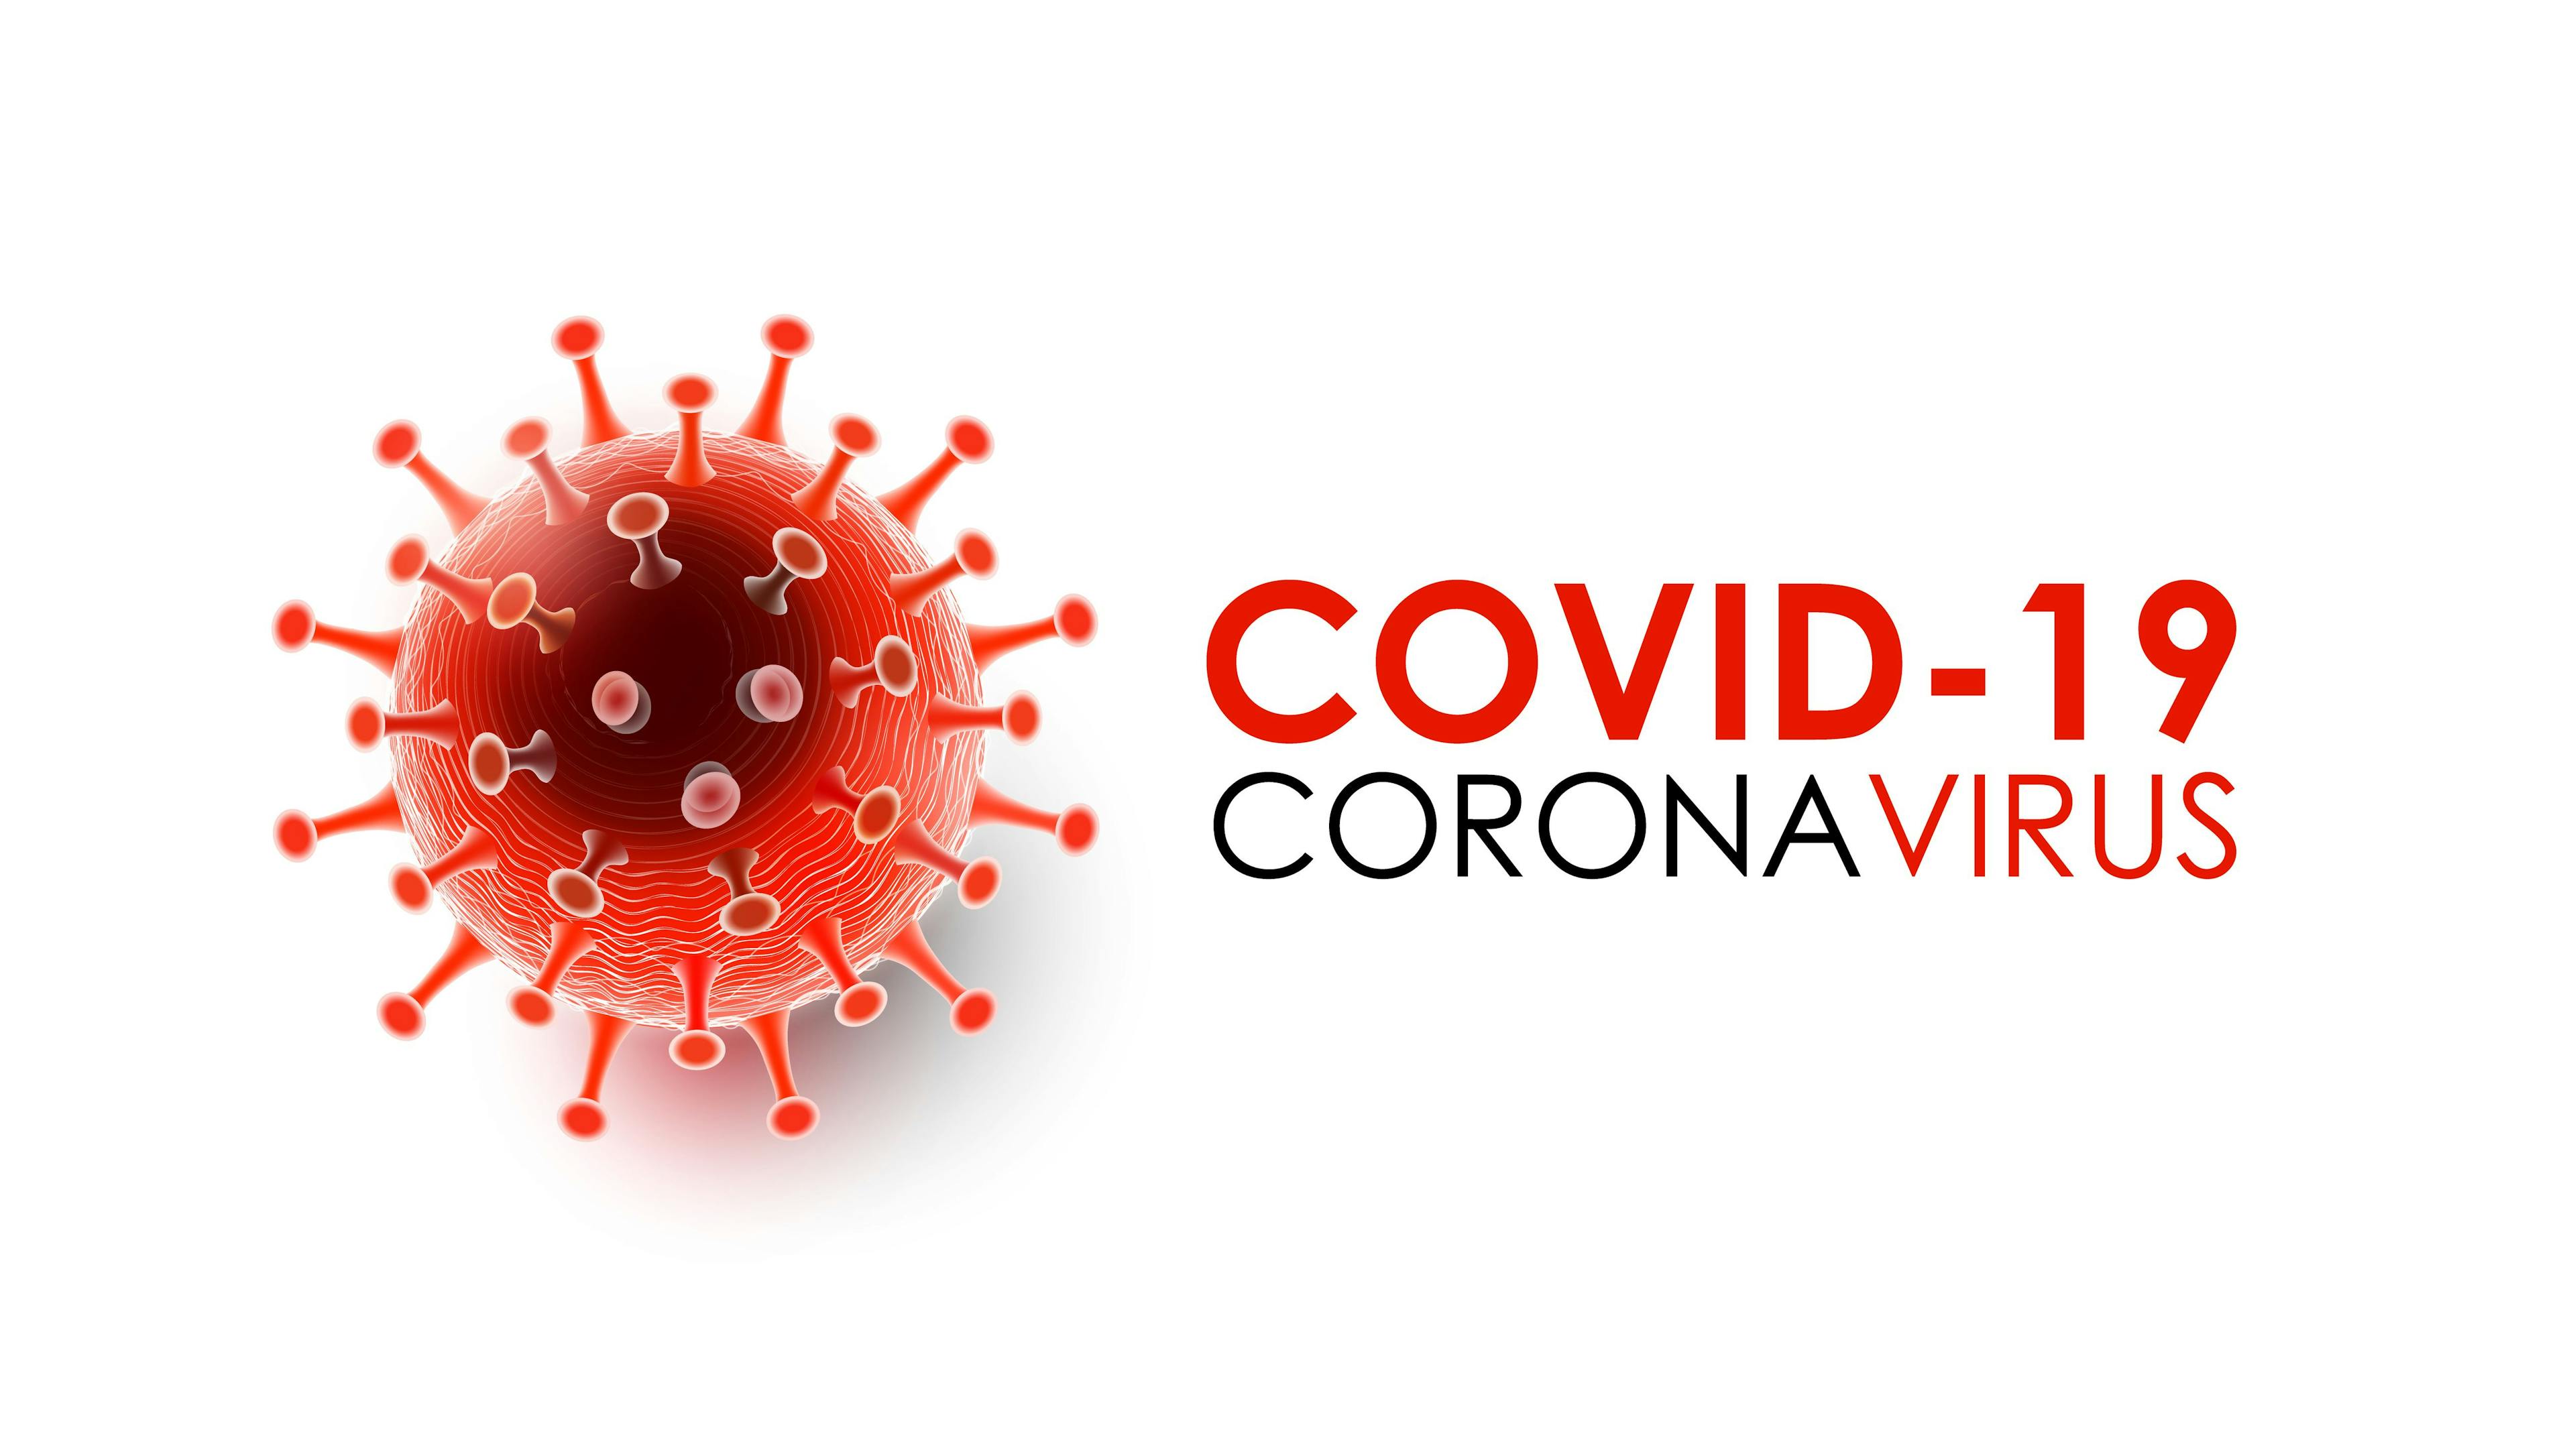 Biden administration ramps up efforts to test for and treat COVID-19